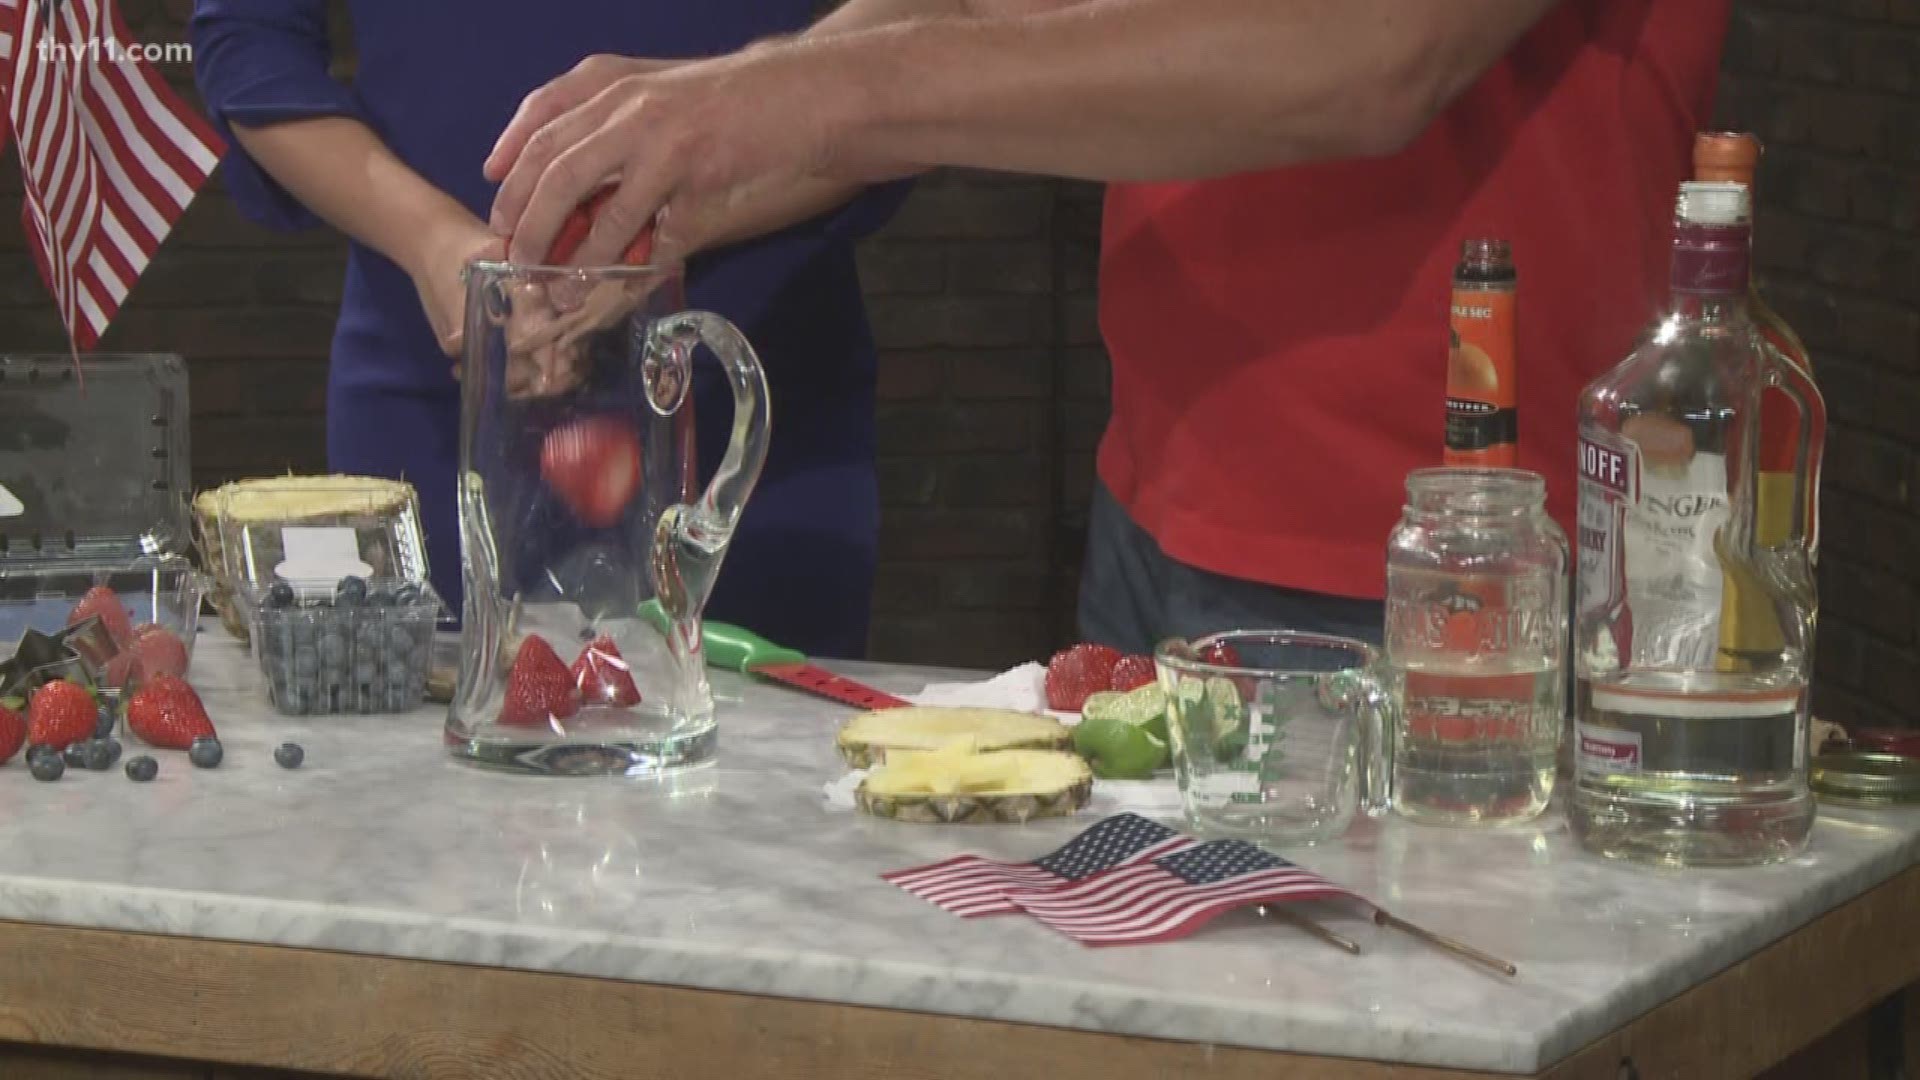 COOL DOWN AND CELEBRATE THE HOLIDAYS WITH A HOMEMADE JULY 4TH SANGRIA. OUR HOME AND GARDEN EXPERT CHRIS H. OSLEN SAYS HE'S GOT THE ULTIMATE RECIPE.